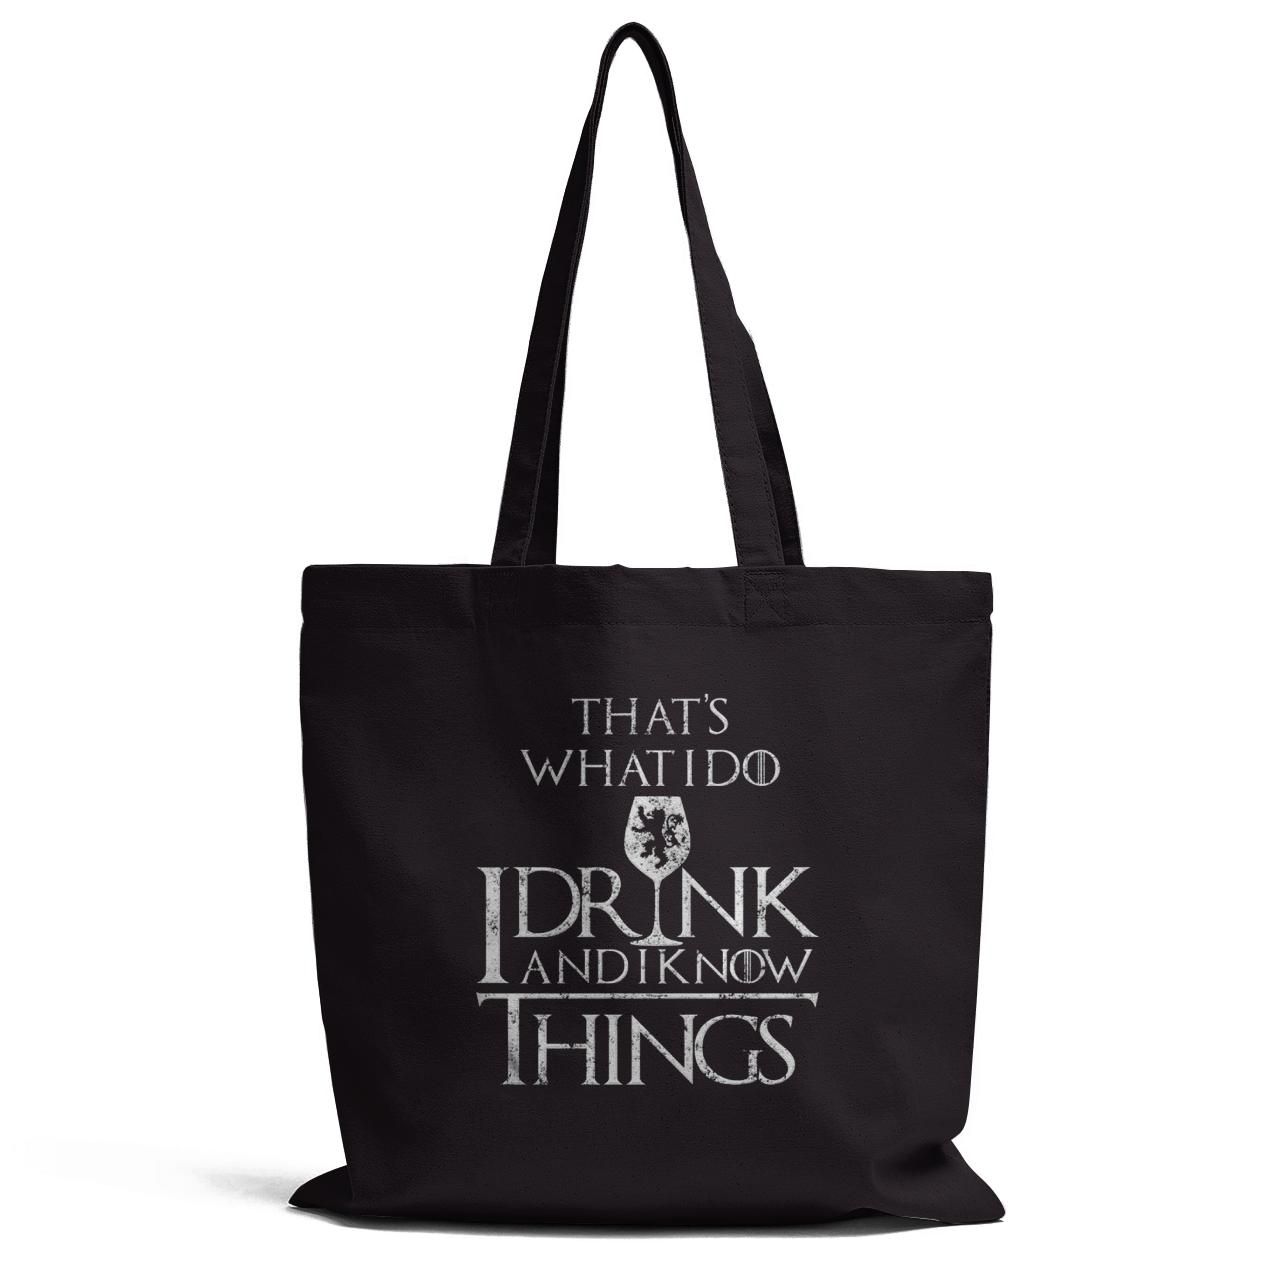 I Drink And I Know Things Tote Bag